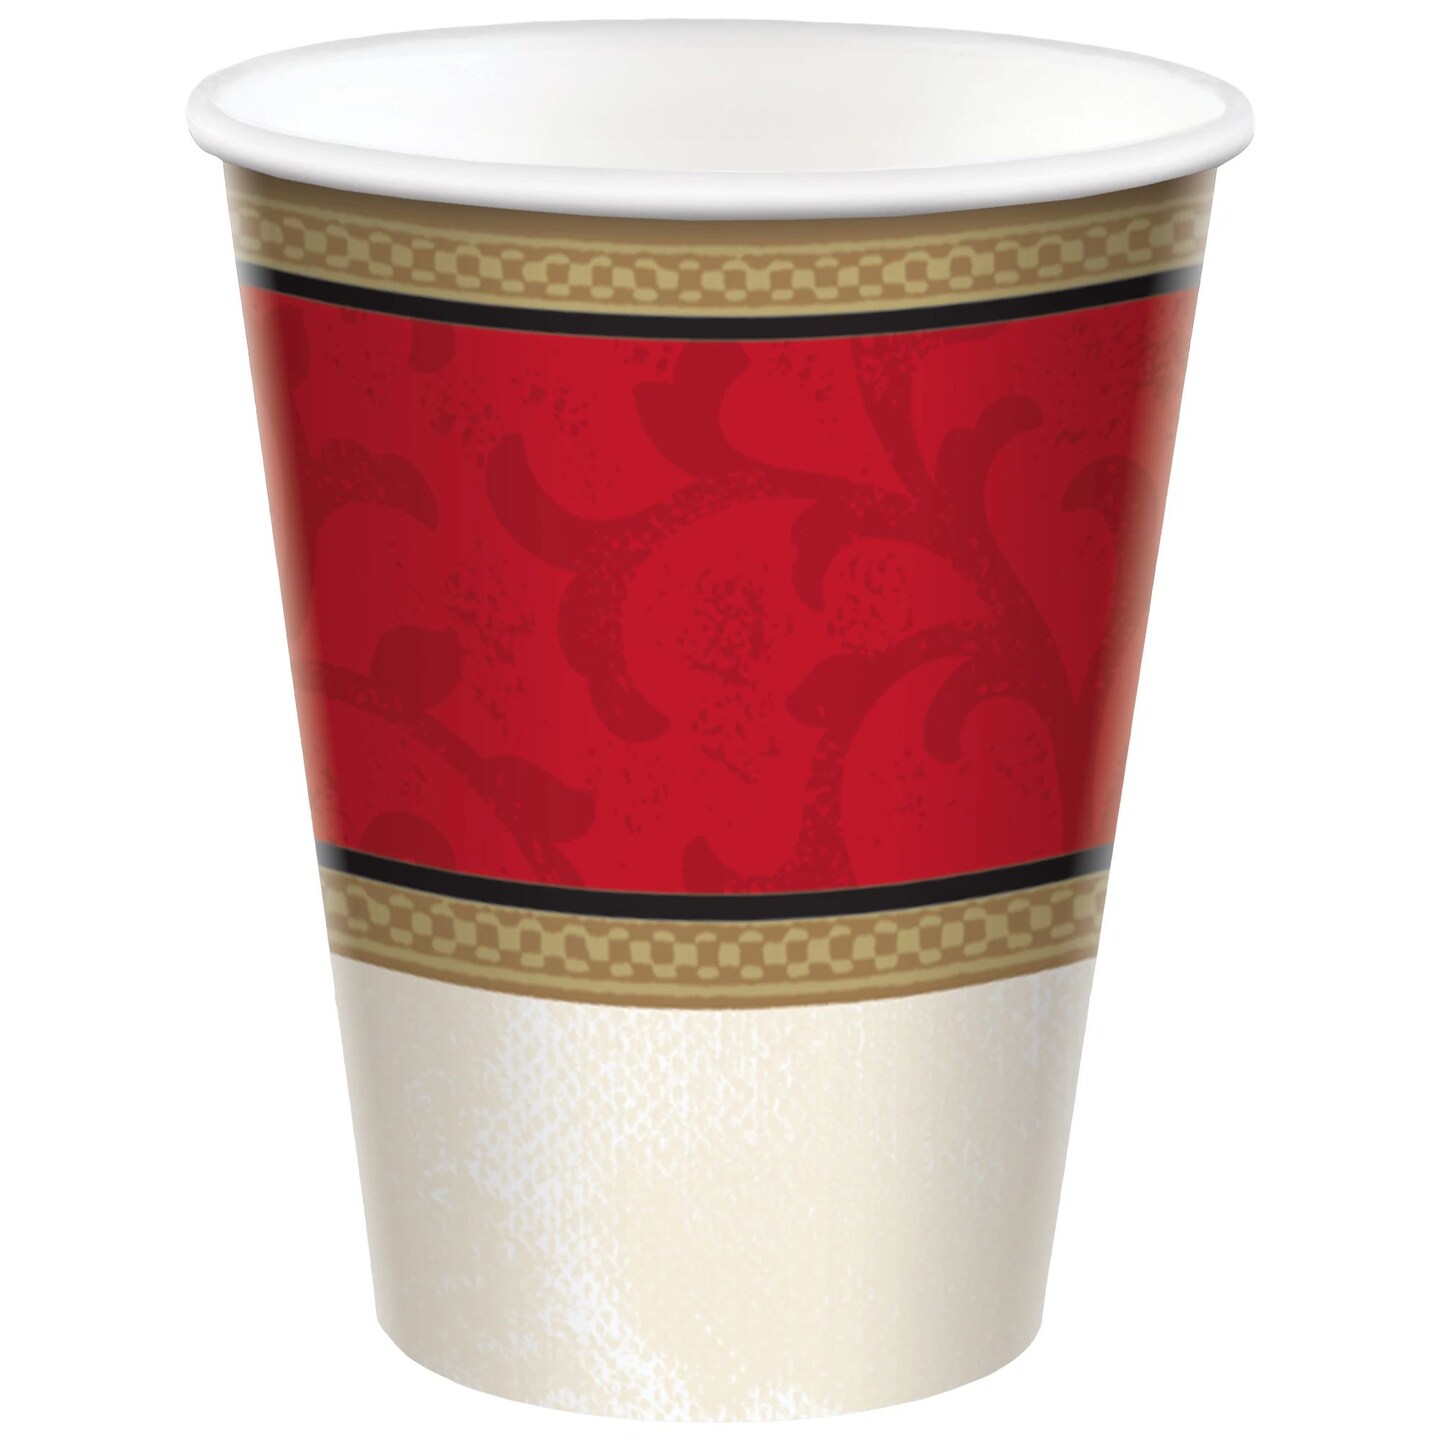 Spring Easter 9oz Paper Cups, 8ct 